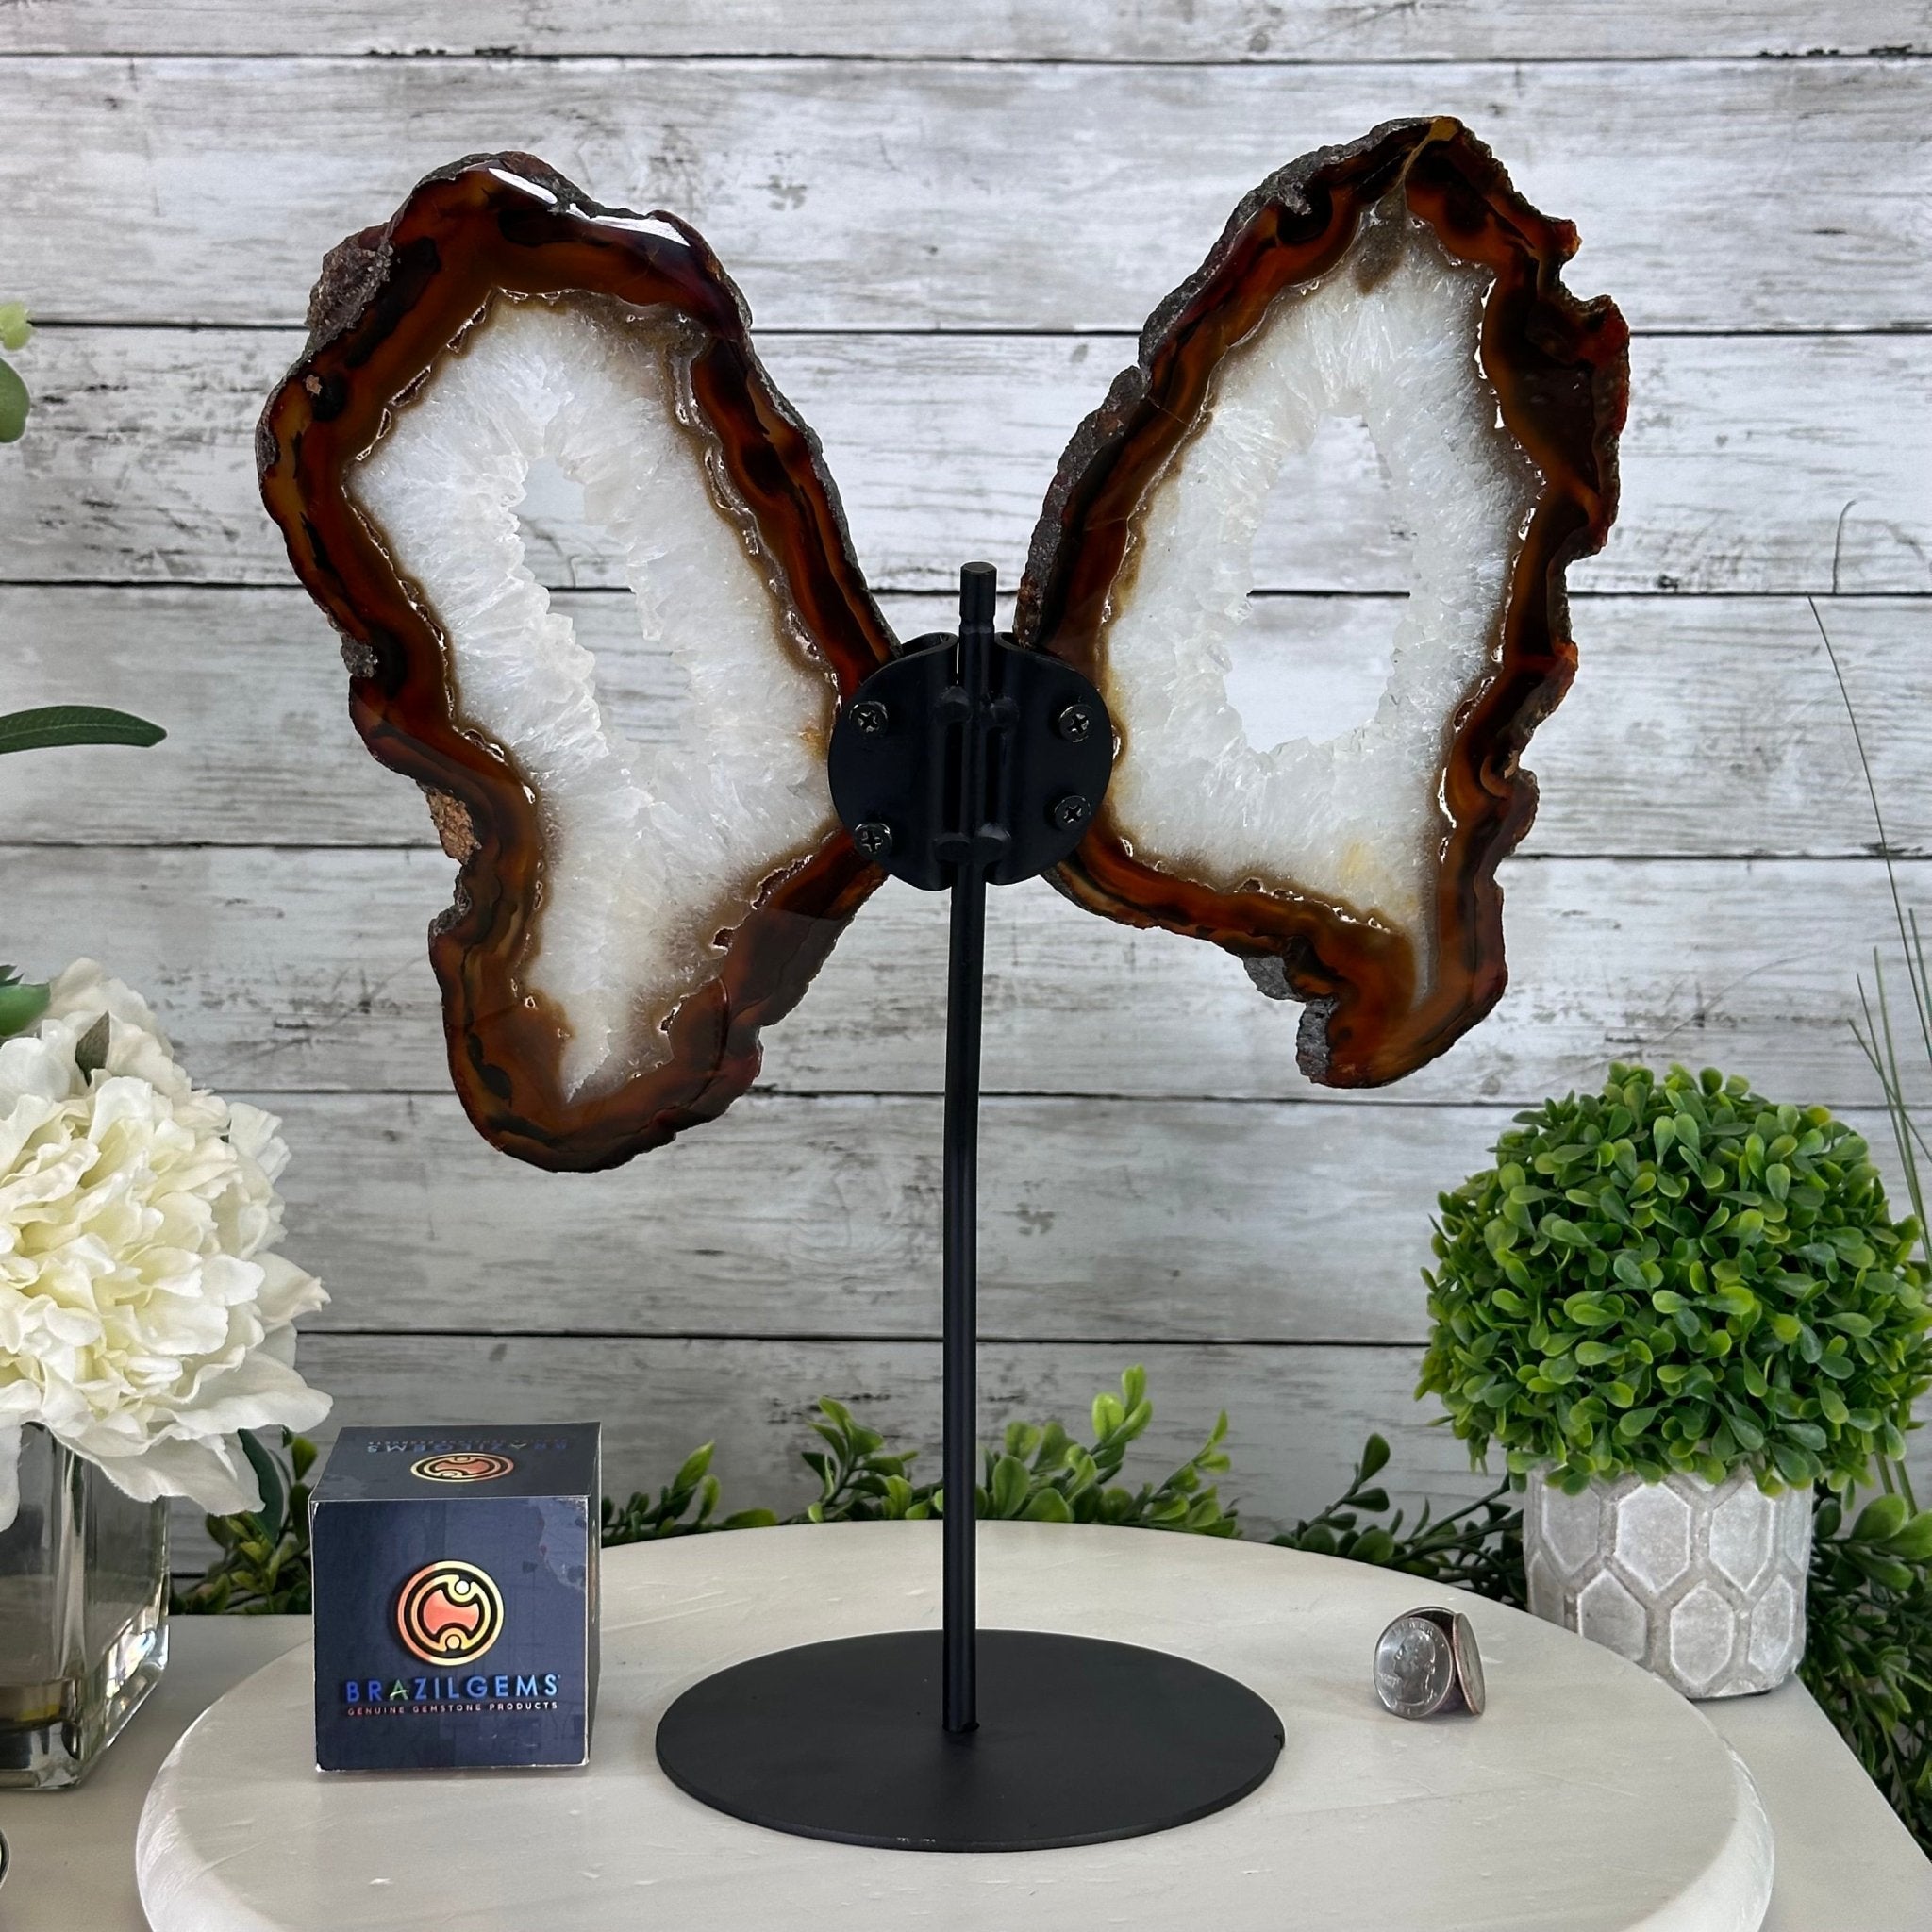 Natural Brazilian Agate "Butterfly Wings", 15" Tall #5050NA-086 - Brazil GemsBrazil GemsNatural Brazilian Agate "Butterfly Wings", 15" Tall #5050NA-086Agate Butterfly Wings5050NA-086